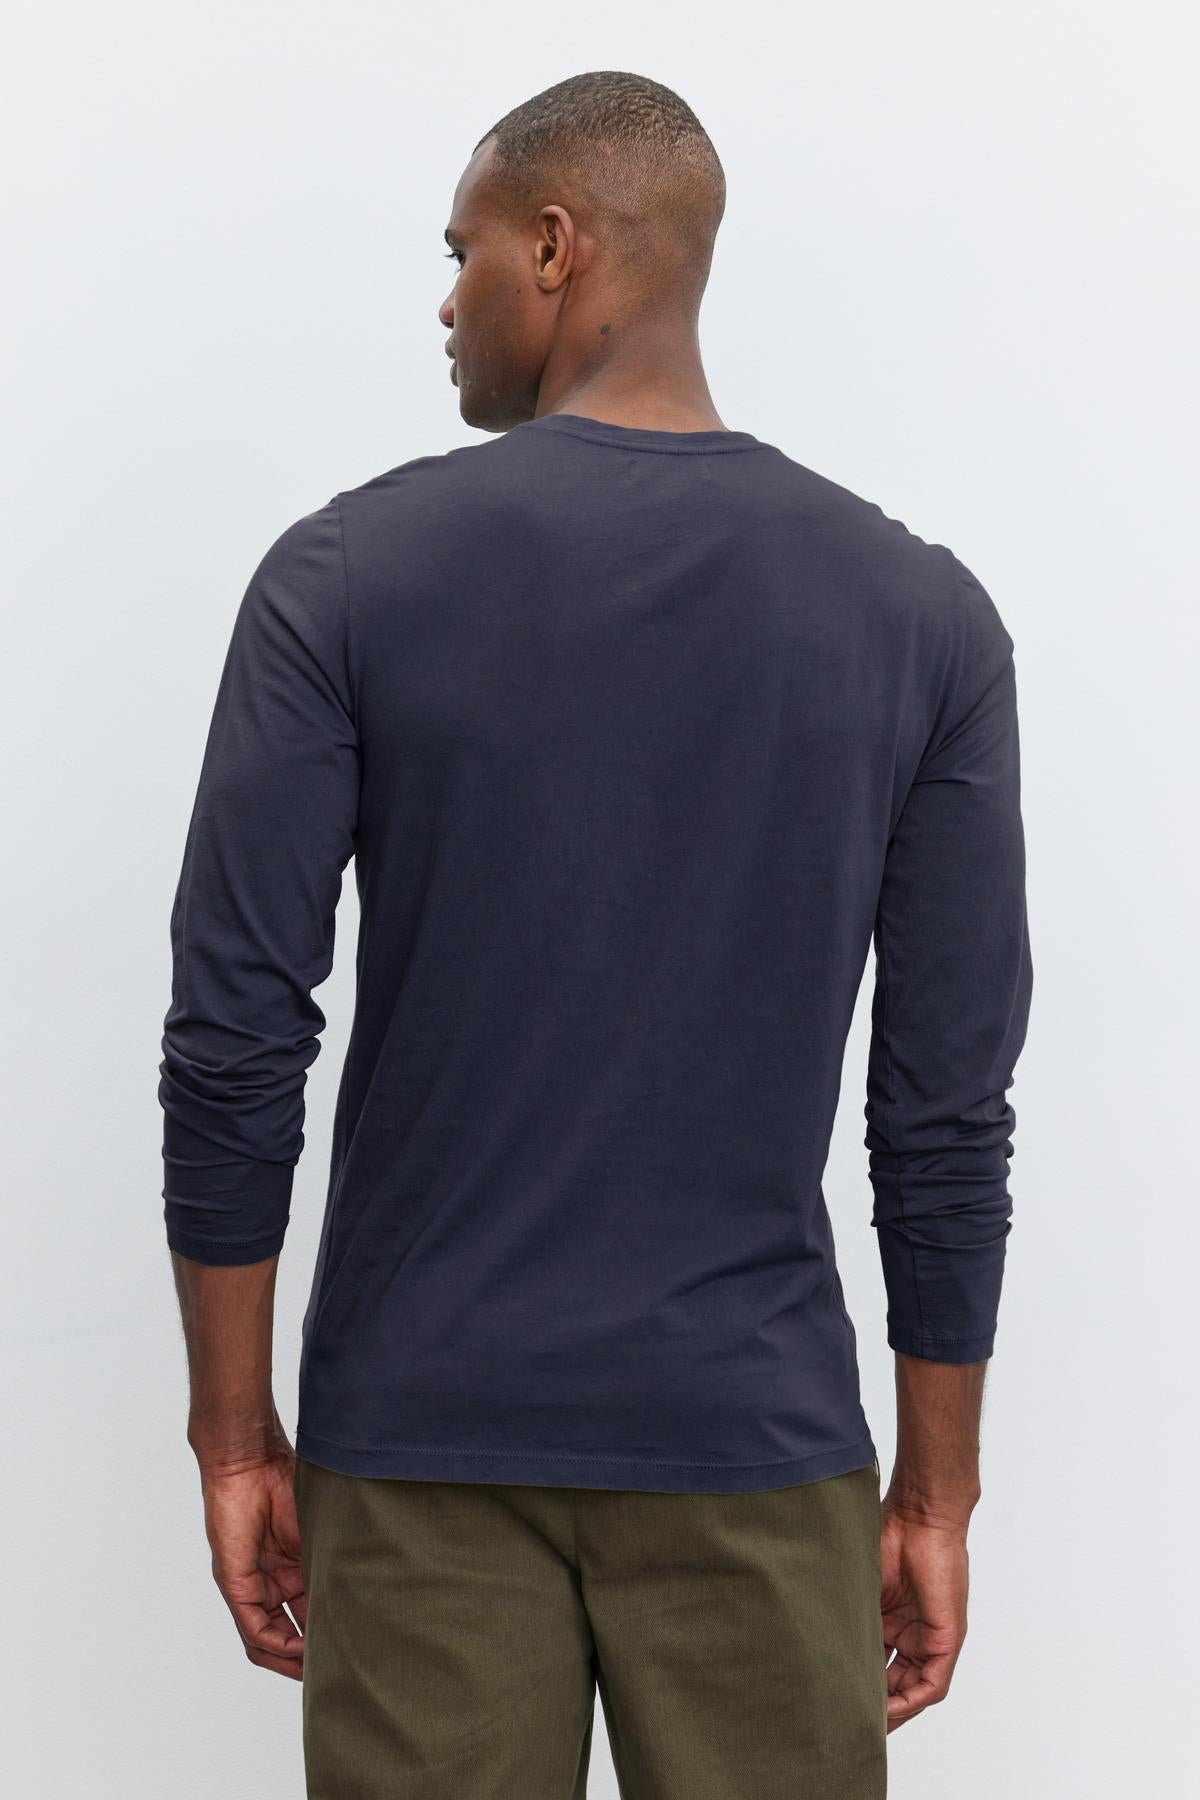 Rear view of a man wearing a Velvet by Graham & Spencer SKEETER WHISPER CLASSIC CREW NECK TEE and olive green garment-dyed pants, standing against a plain white background.-36342439379137